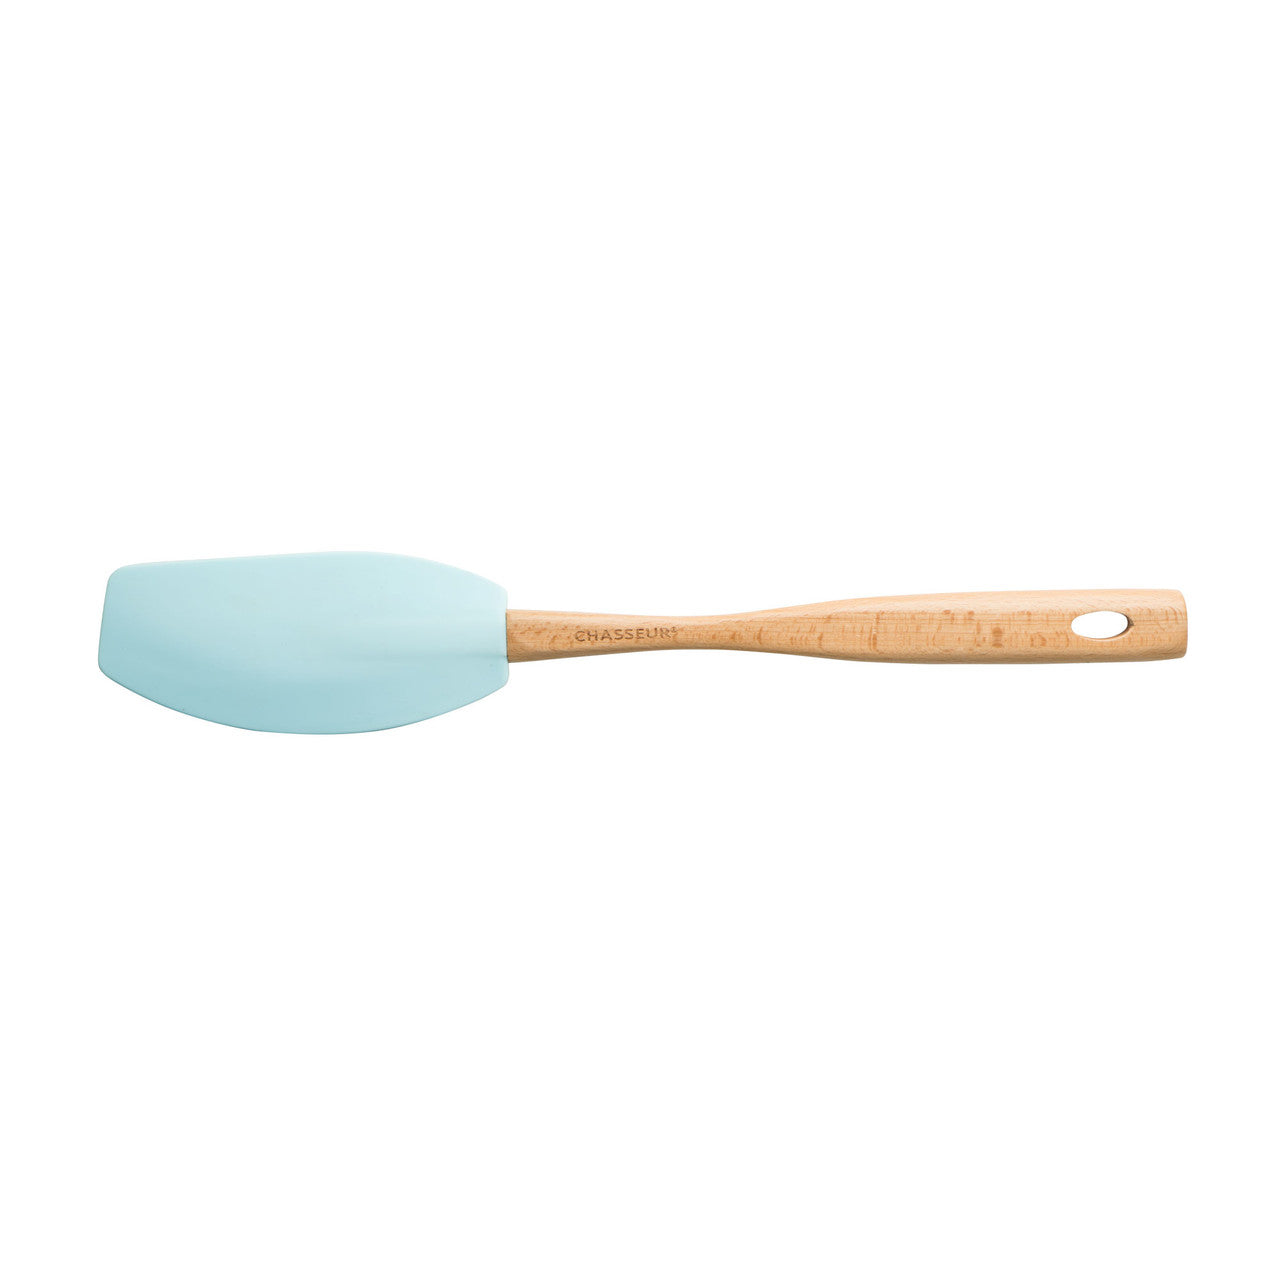 Spatula (Curved) in Duck Egg Blue